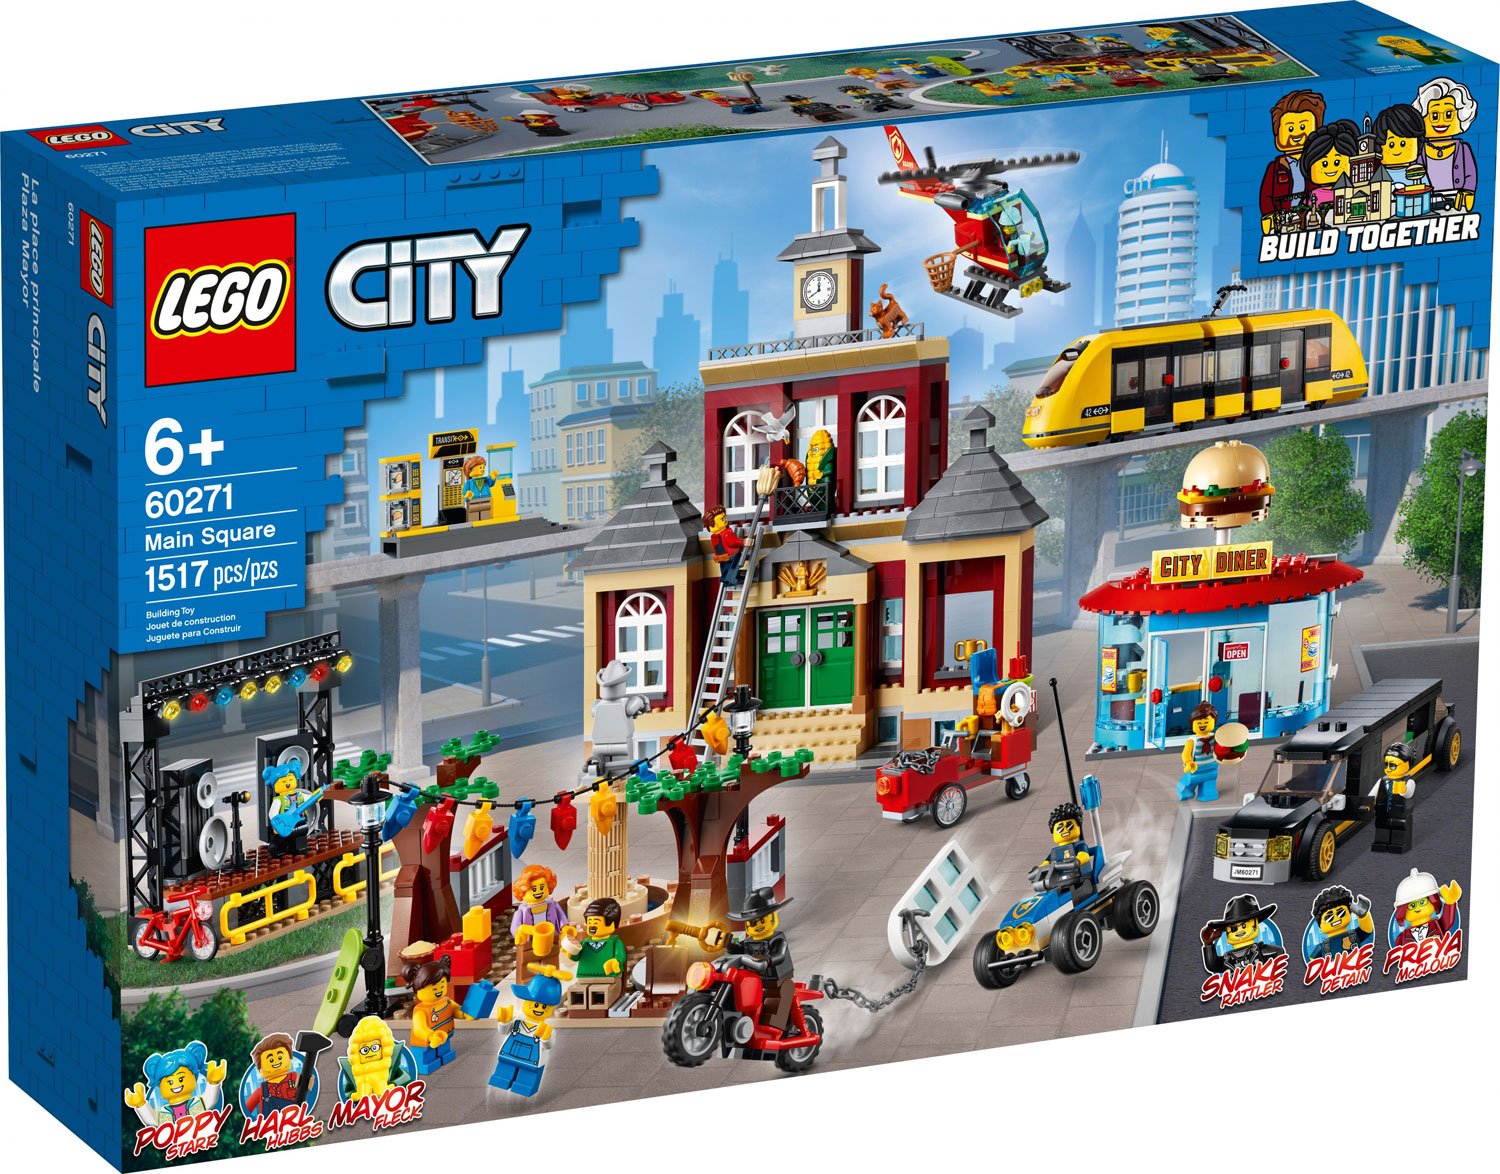 LEGO City 2020 - Rumors, Speculation, and Discussion - LEGO Town -  Eurobricks Forums